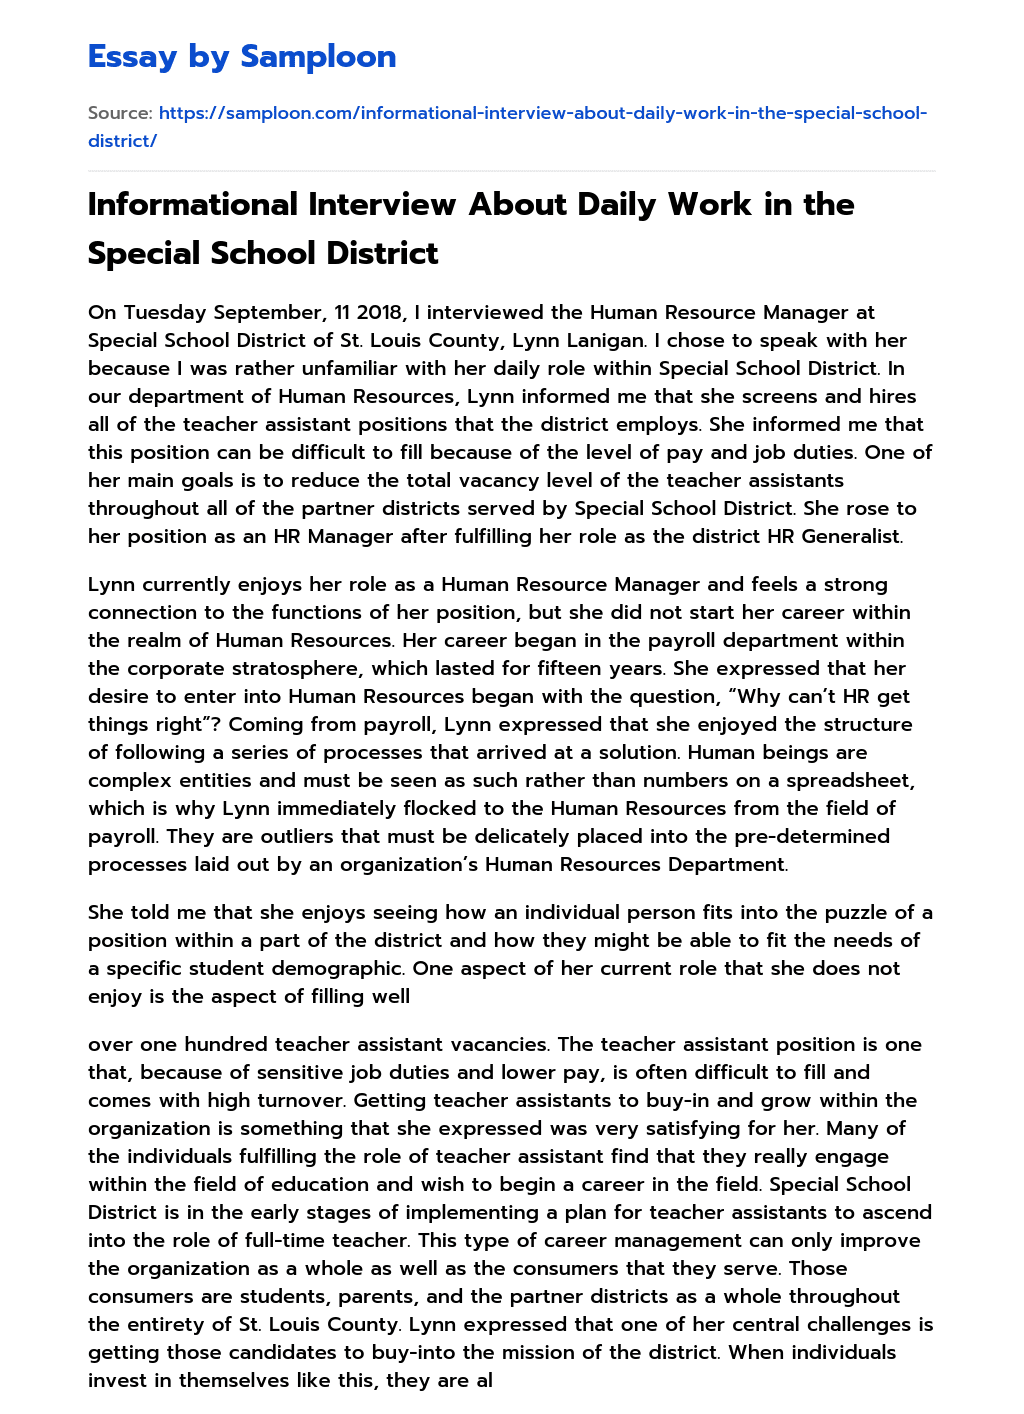 Informational Interview About Daily Work in the Special School District essay